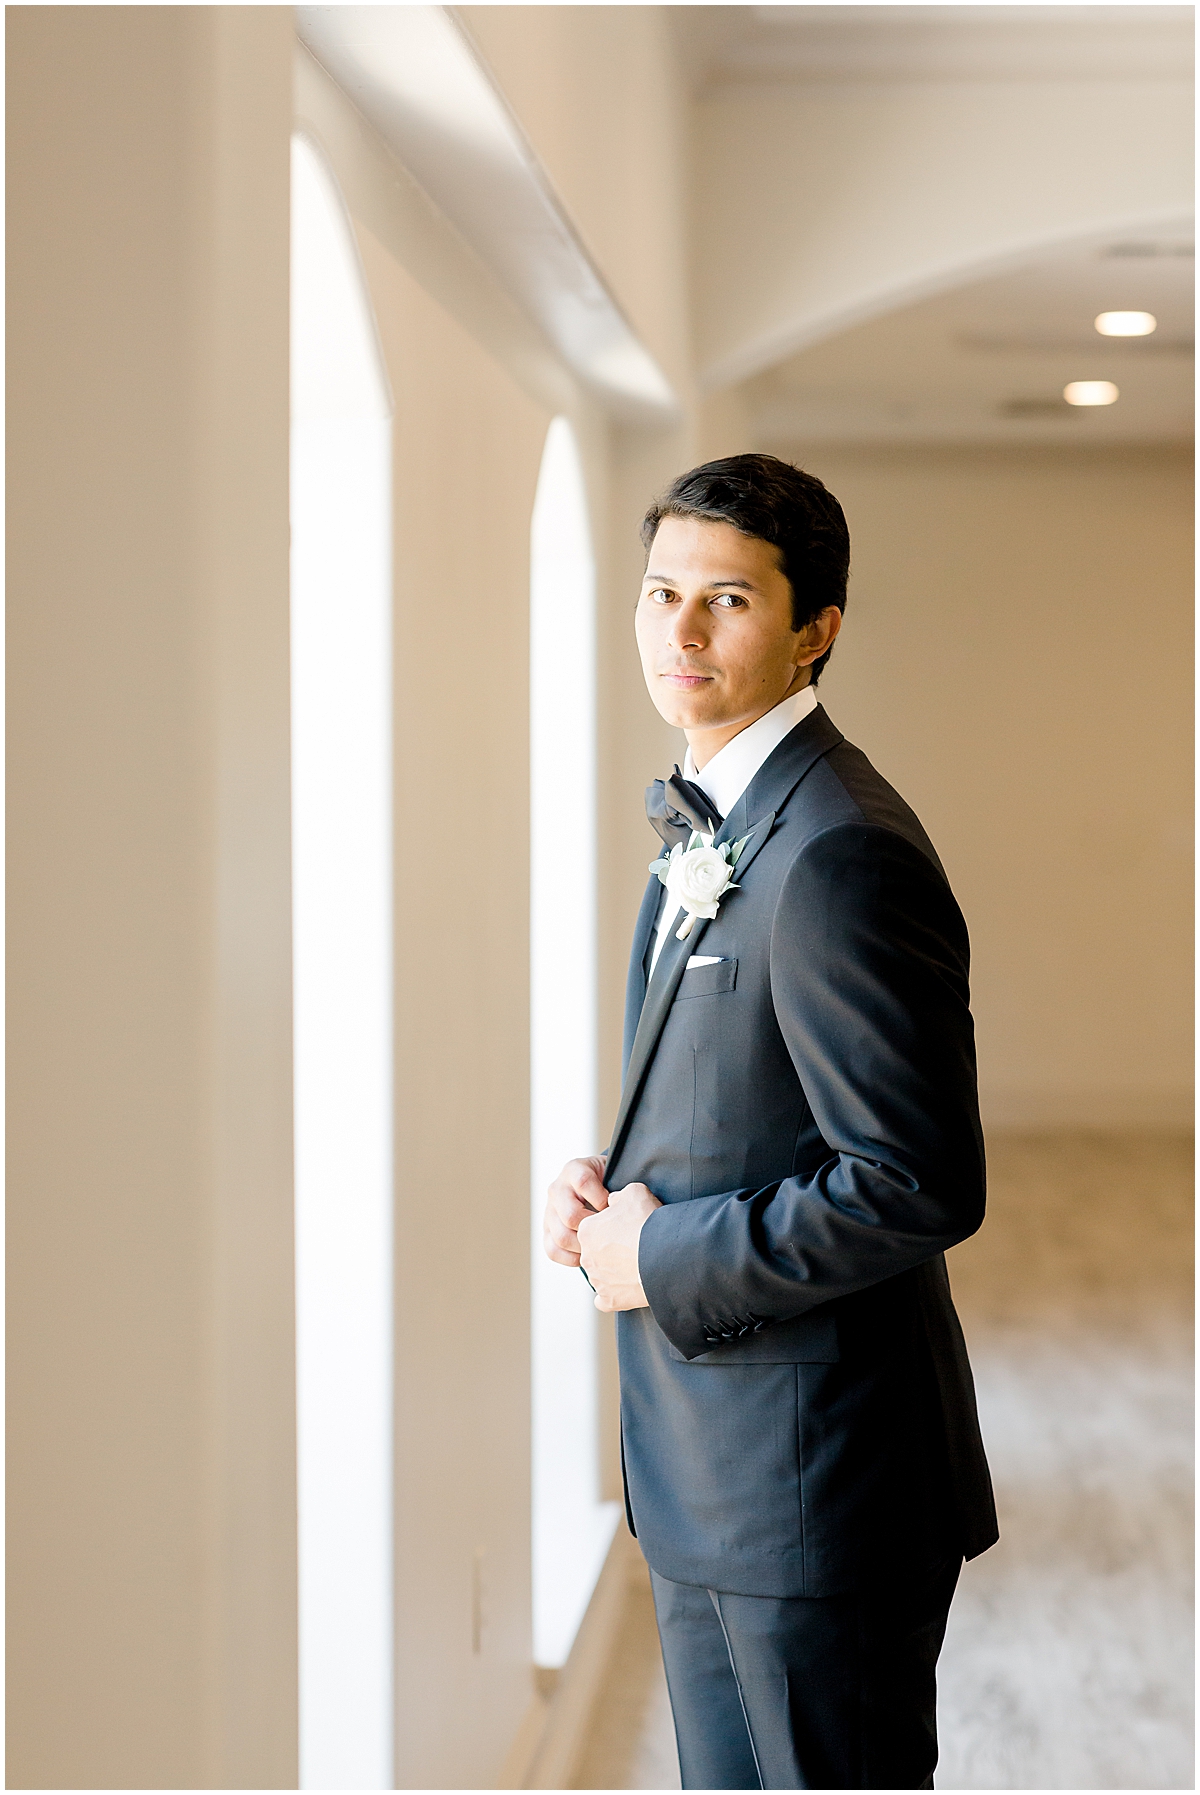 Groom portraits | Knotting Hill Wedding Little Elm Texas Photography by Mary Talamantes